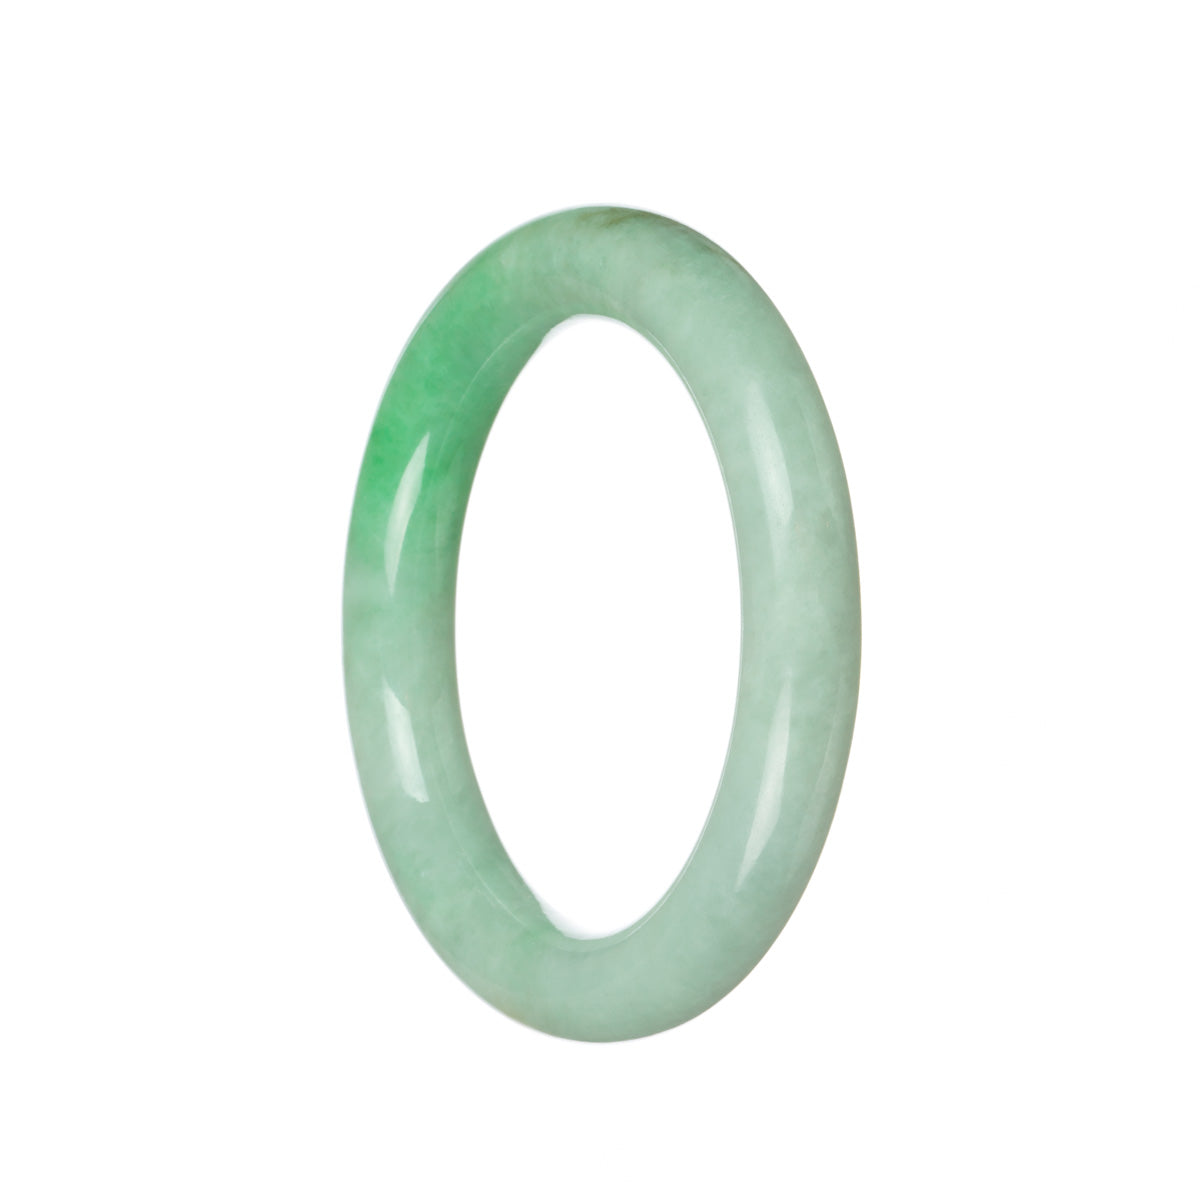 A close-up photo of a stunning emerald green Burma Jade bangle. The bangle is in the shape of a half moon and has a diameter of 58mm. It is certified Grade A and exhibits a beautiful, smooth texture. The rich green color of the jade is captivating and exudes elegance. Crafted with precision and quality, this bangle from MAYS™ is a true gemstone masterpiece.